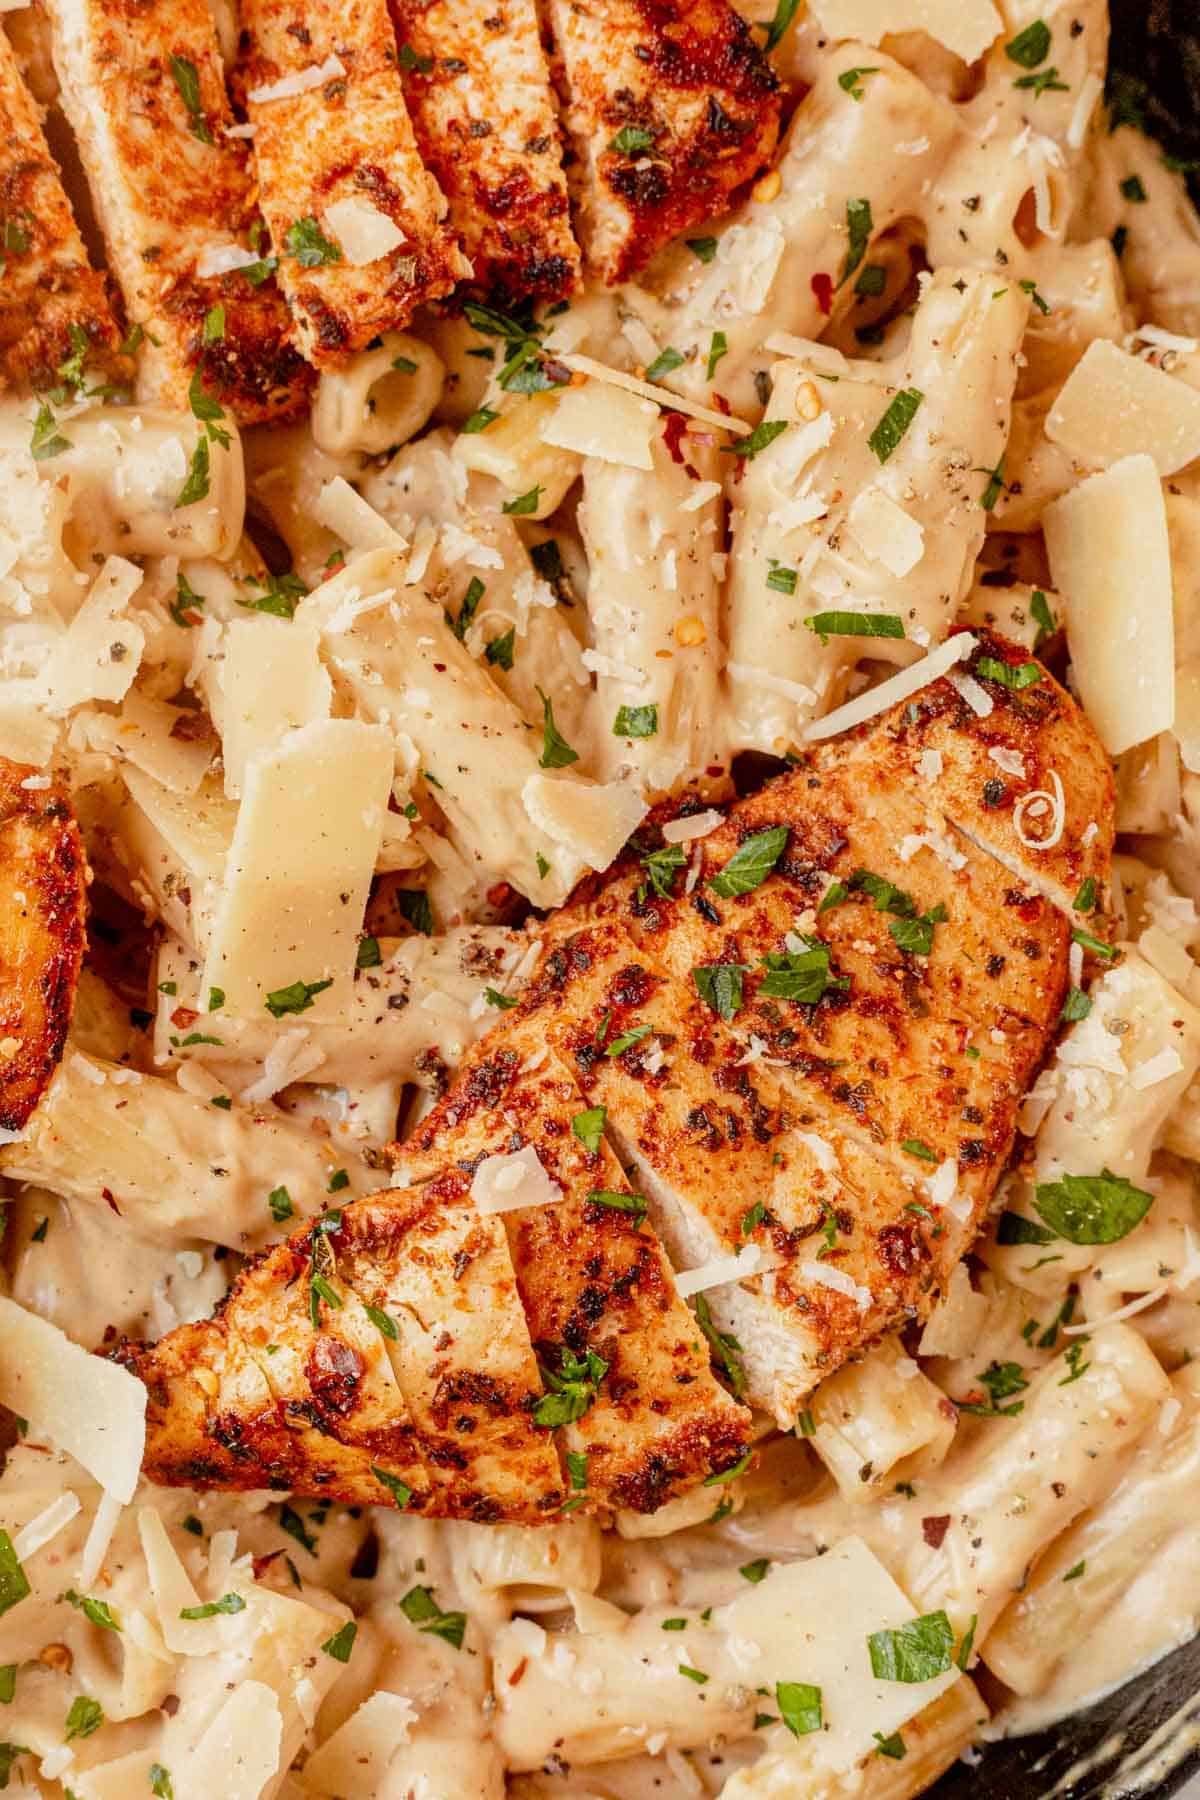 sliced chicken breast on top of cheesy pasta